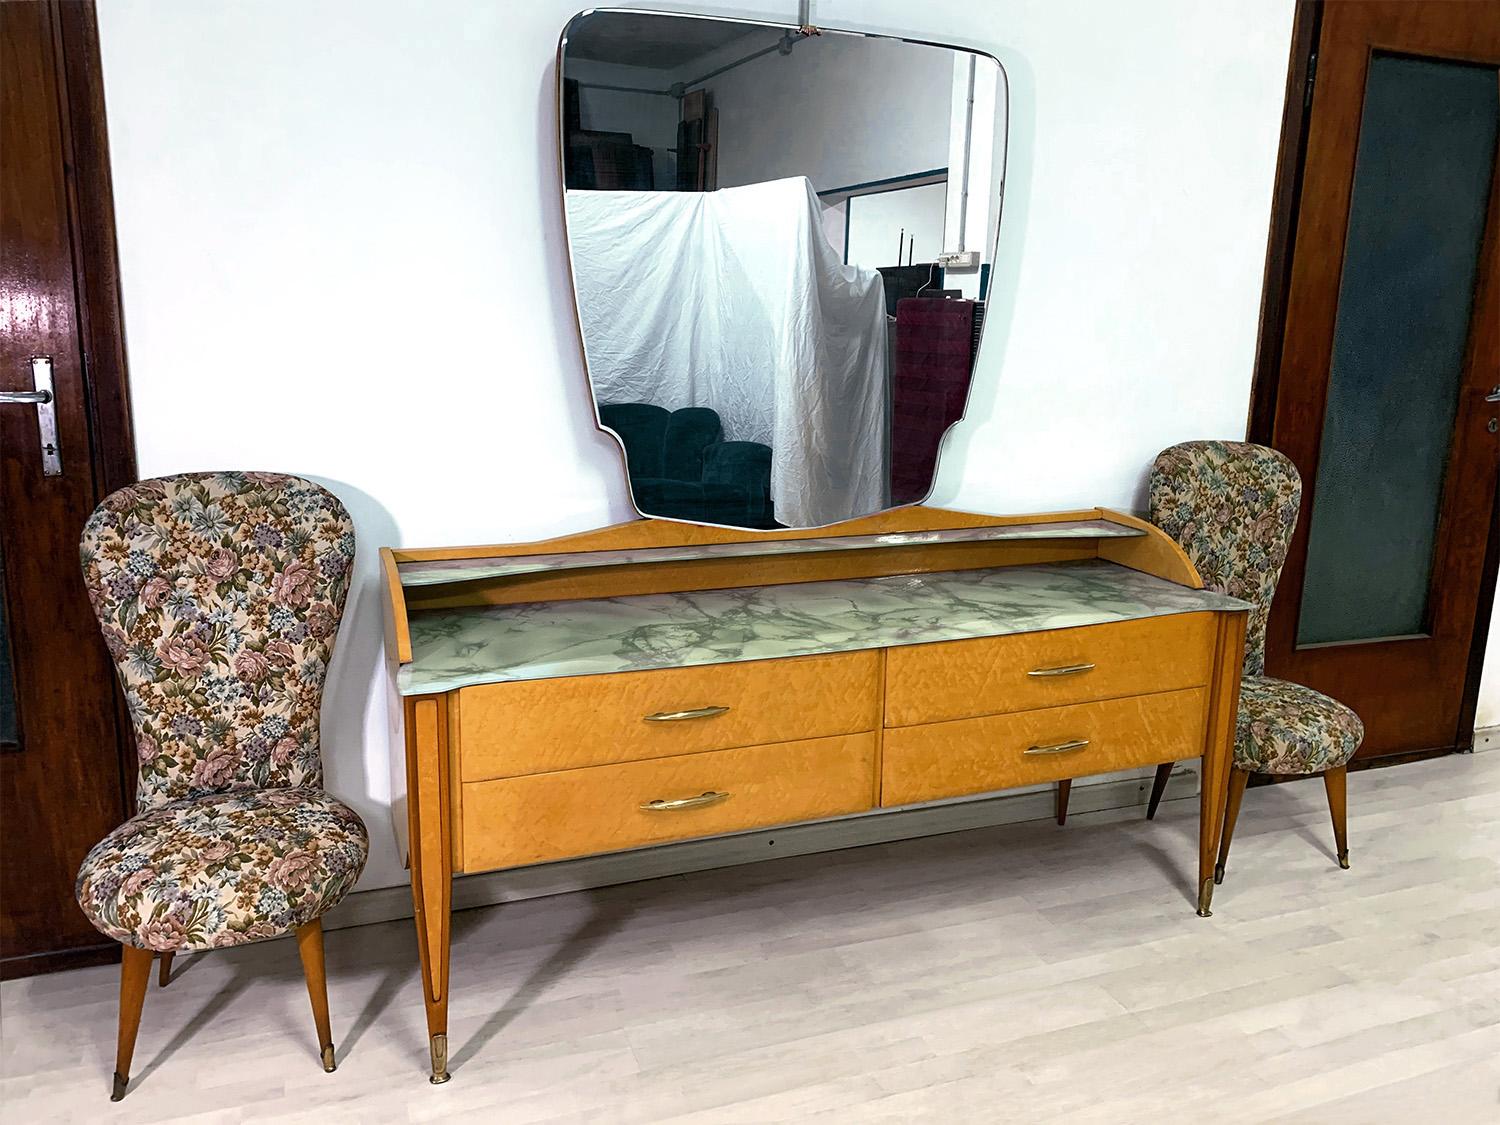 Italian Mid-Century Chest of Drawers with Mirror Gio Ponti Style, 1950's For Sale 8